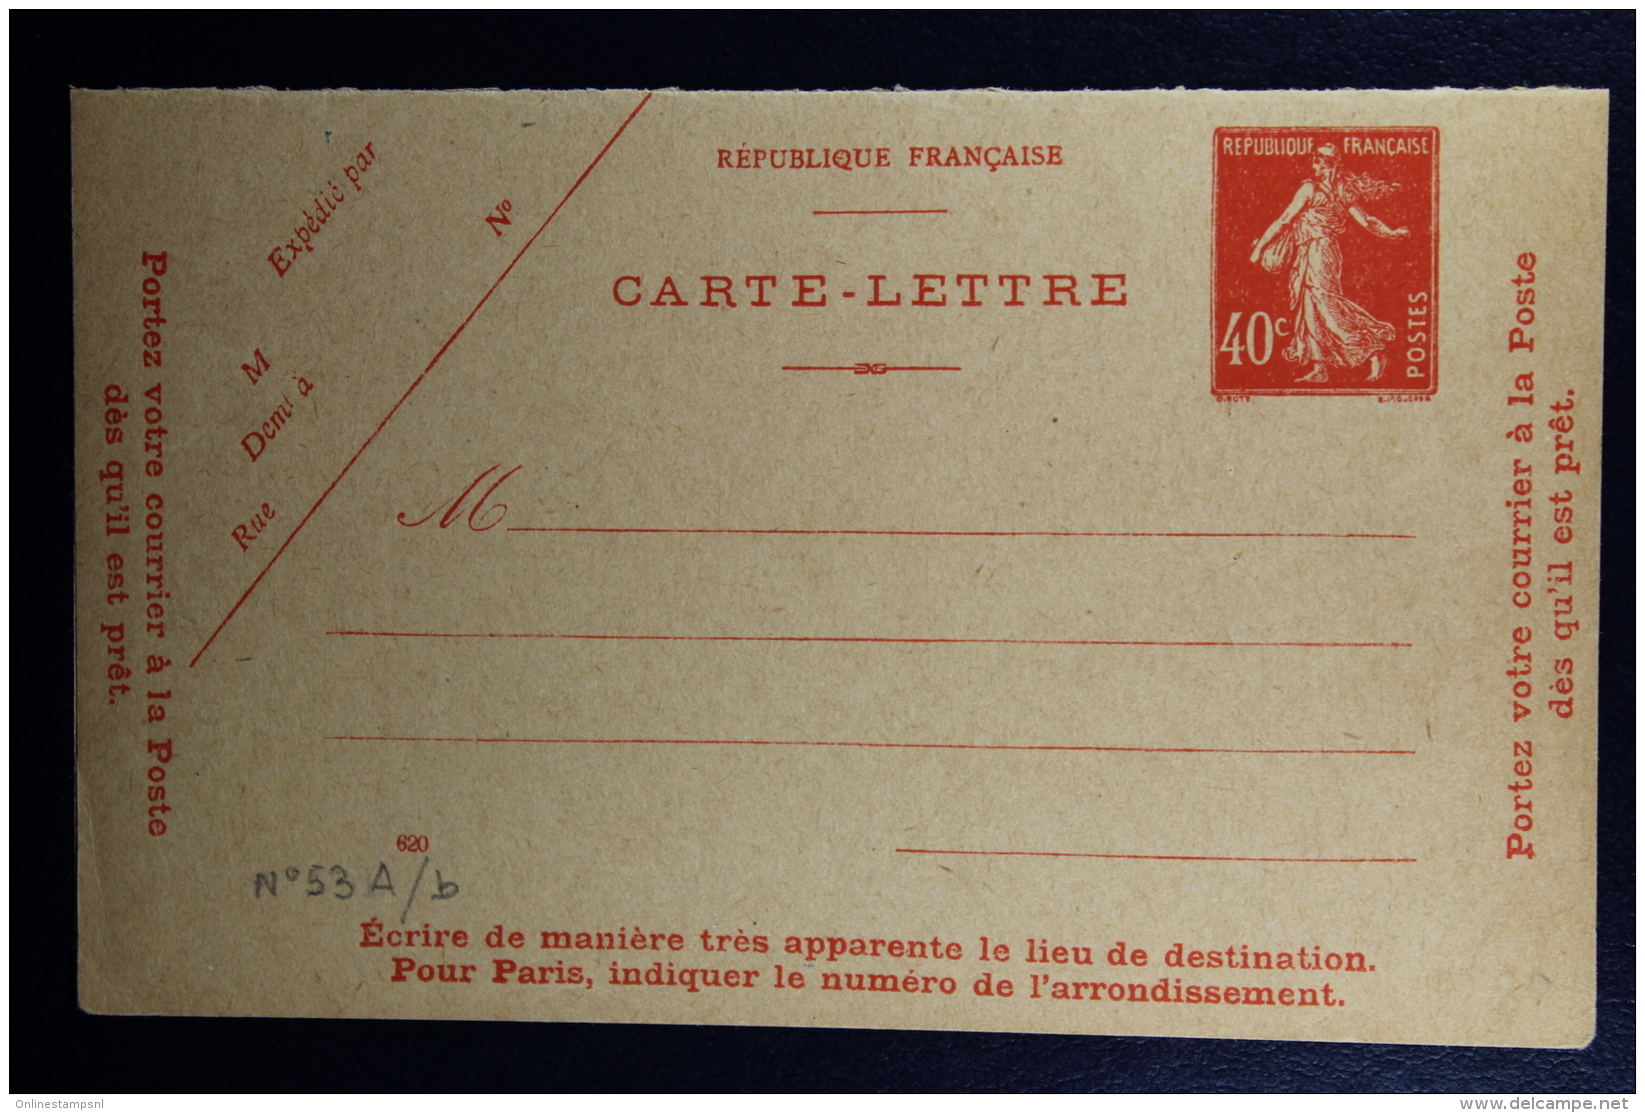 France: Carte-Lettre  Semeuse Camee  40 C.   Type P2 A   Non Perforée Not Used   Date 620 - Cartes-lettres